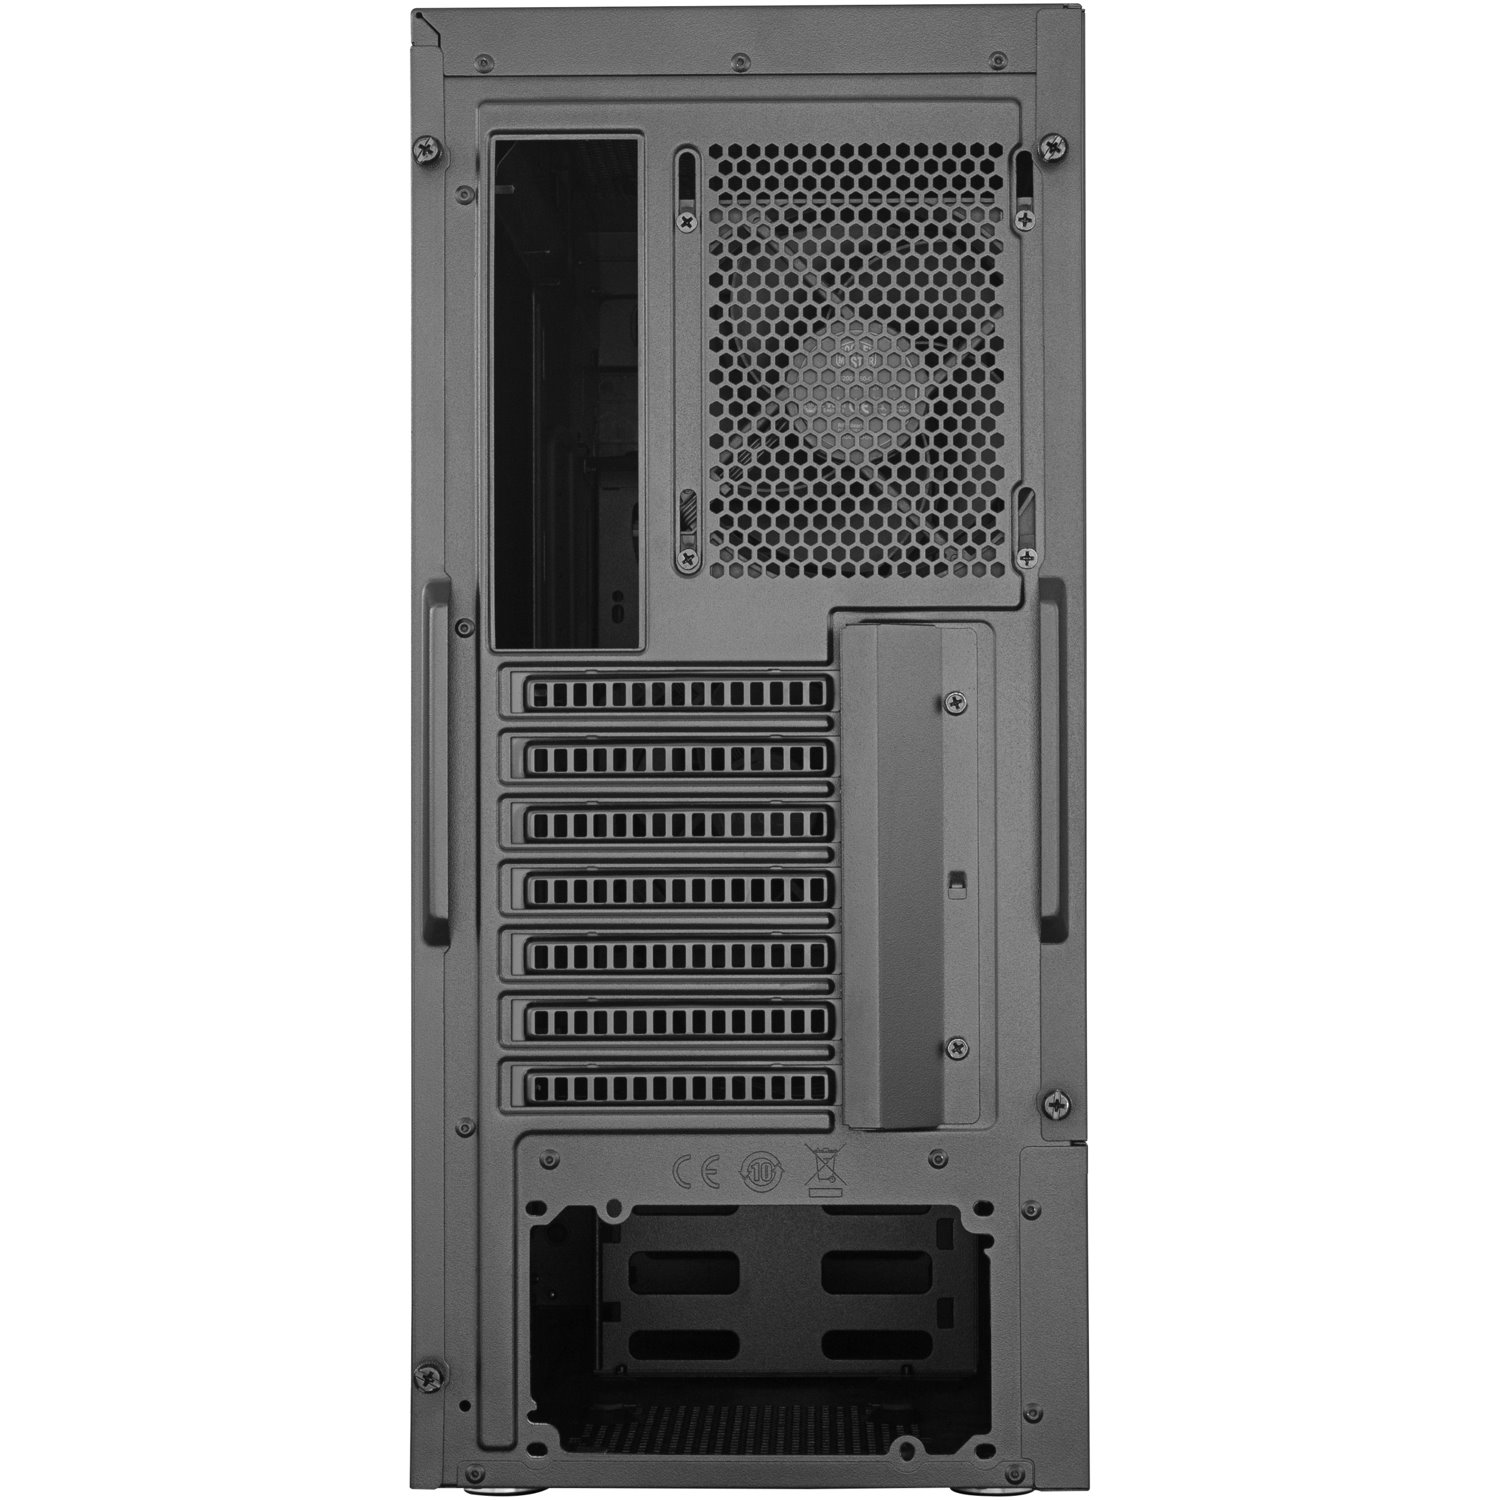 Cooler Master Silencio MCS-S600-KG5N-S00 Computer Case - Mini ITX, Micro ATX, ATX Motherboard Supported - Mid-tower - Steel, Plastic, Tempered Glass - Black